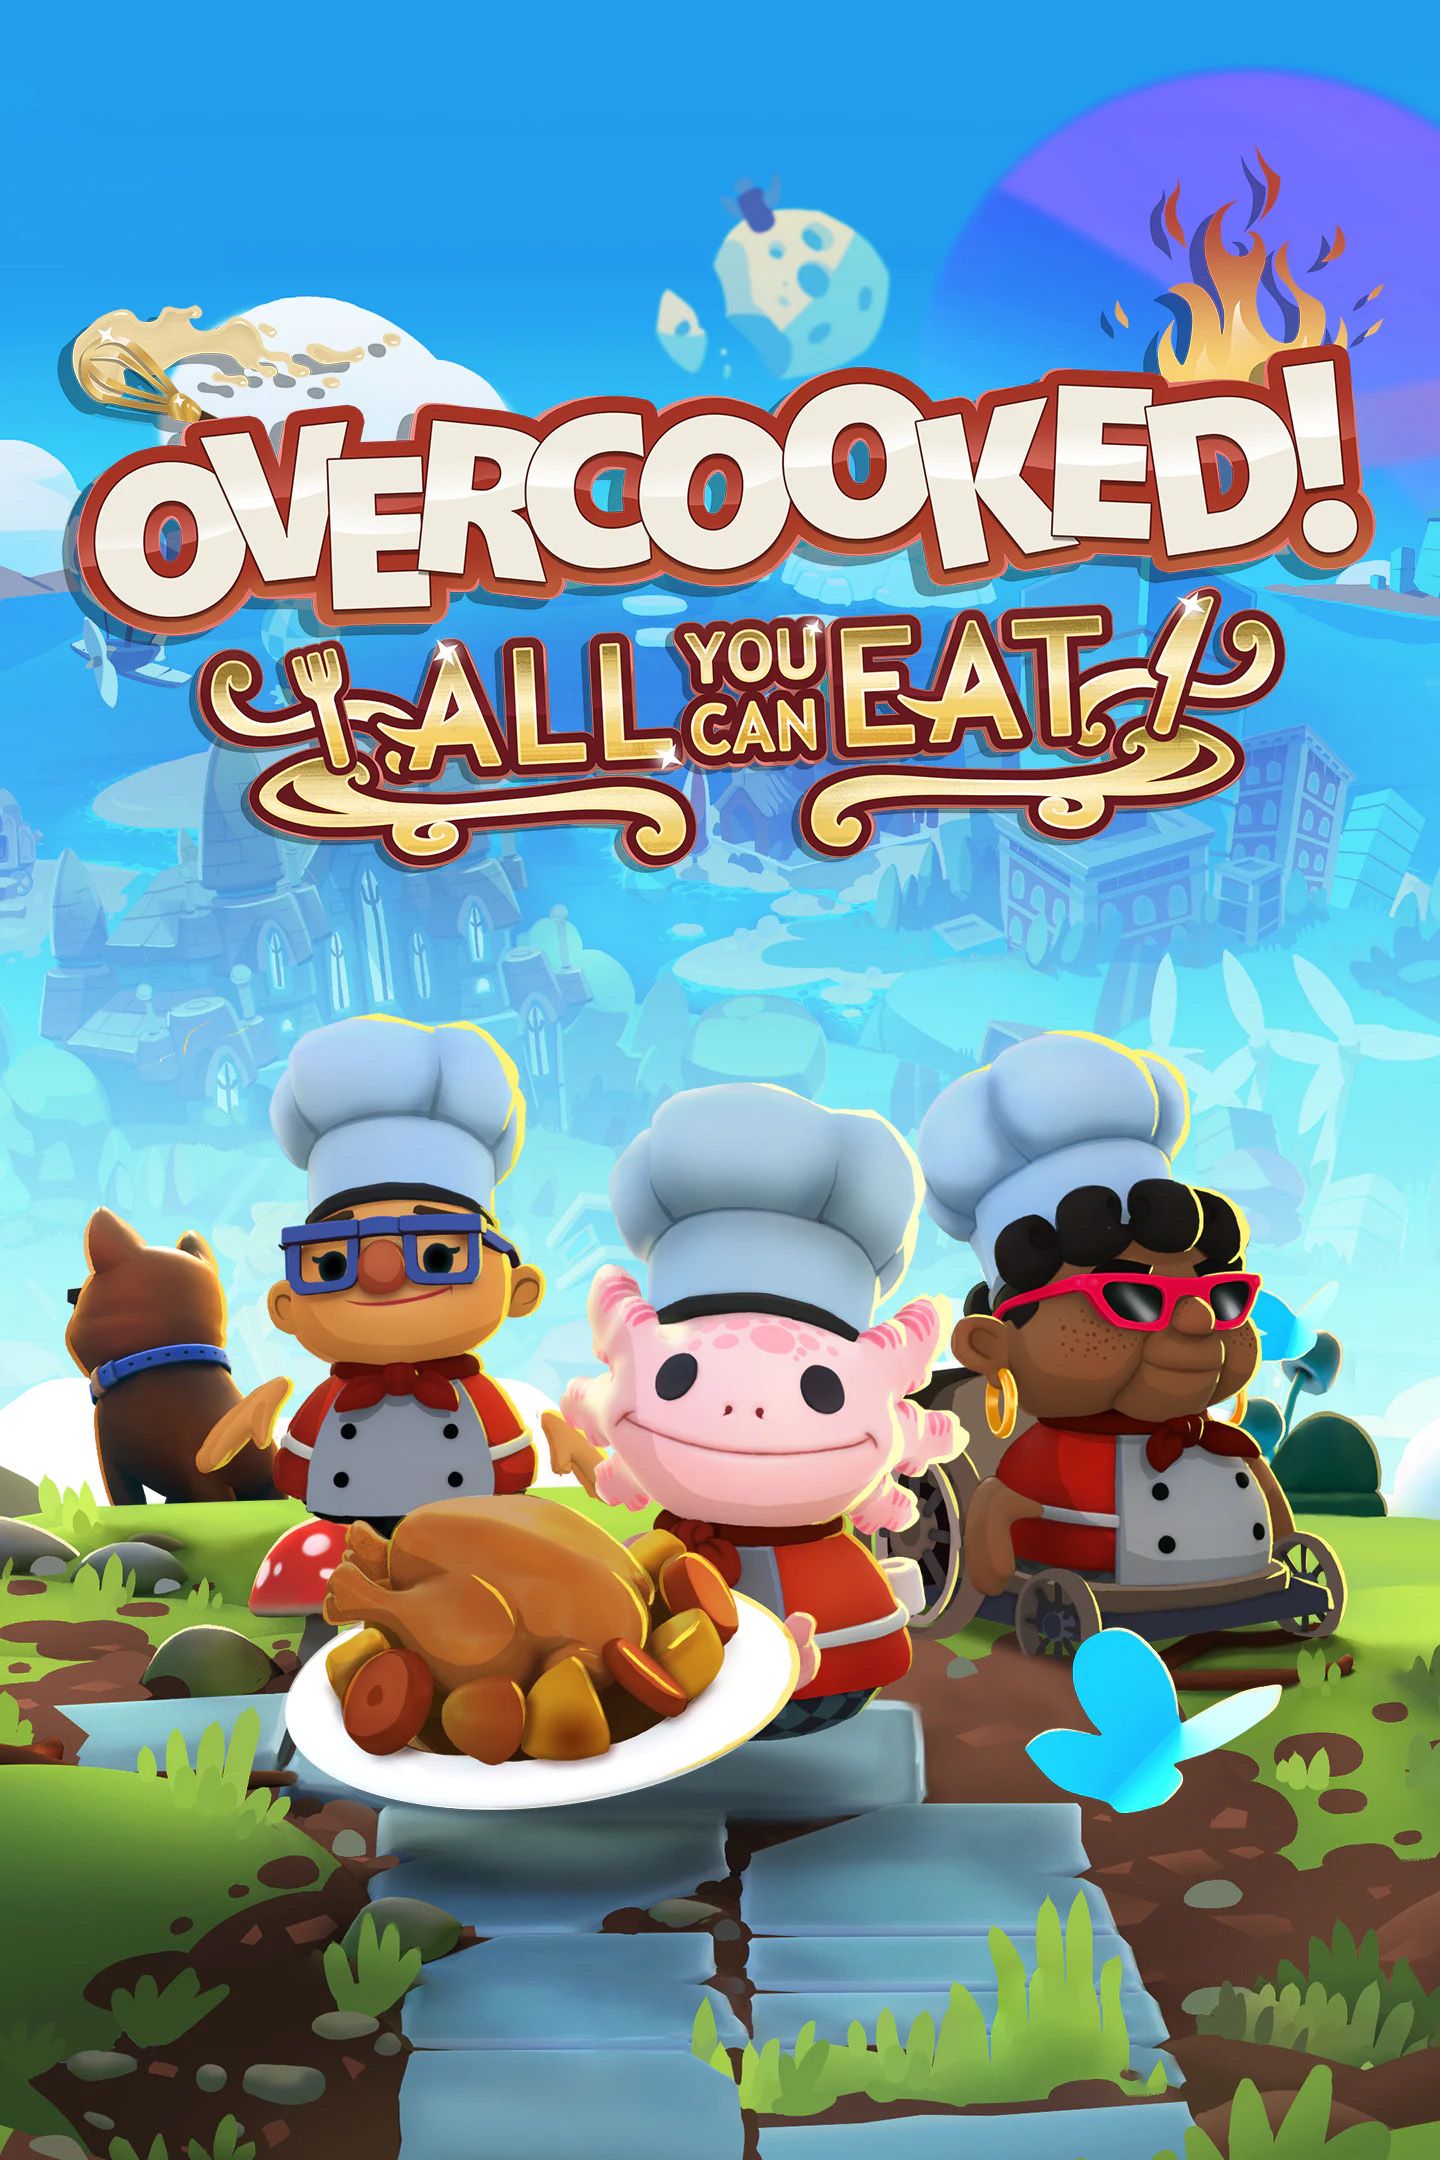 Overcooked All You Can Eat PS5 and Xbox Series X Editions Announced